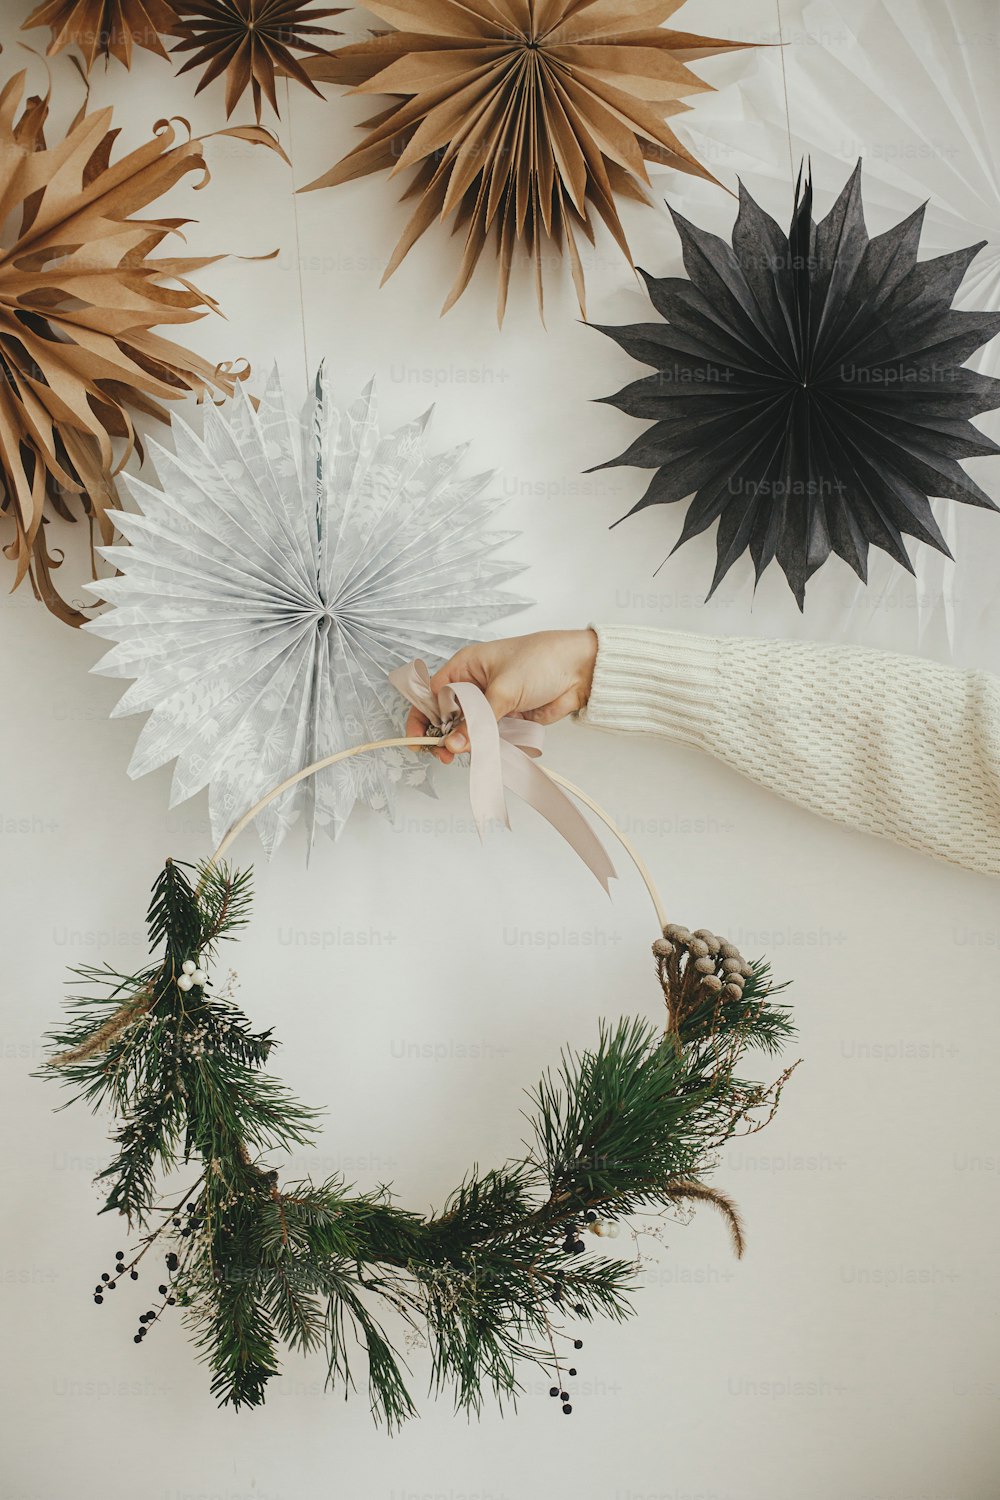 Hand in cozy sweater holding modern christmas wreath on white wall background with swedish paper stars. Merry Christmas and Happy holidays! Minimalist xmas boho wreath in hands. Atmospheric time